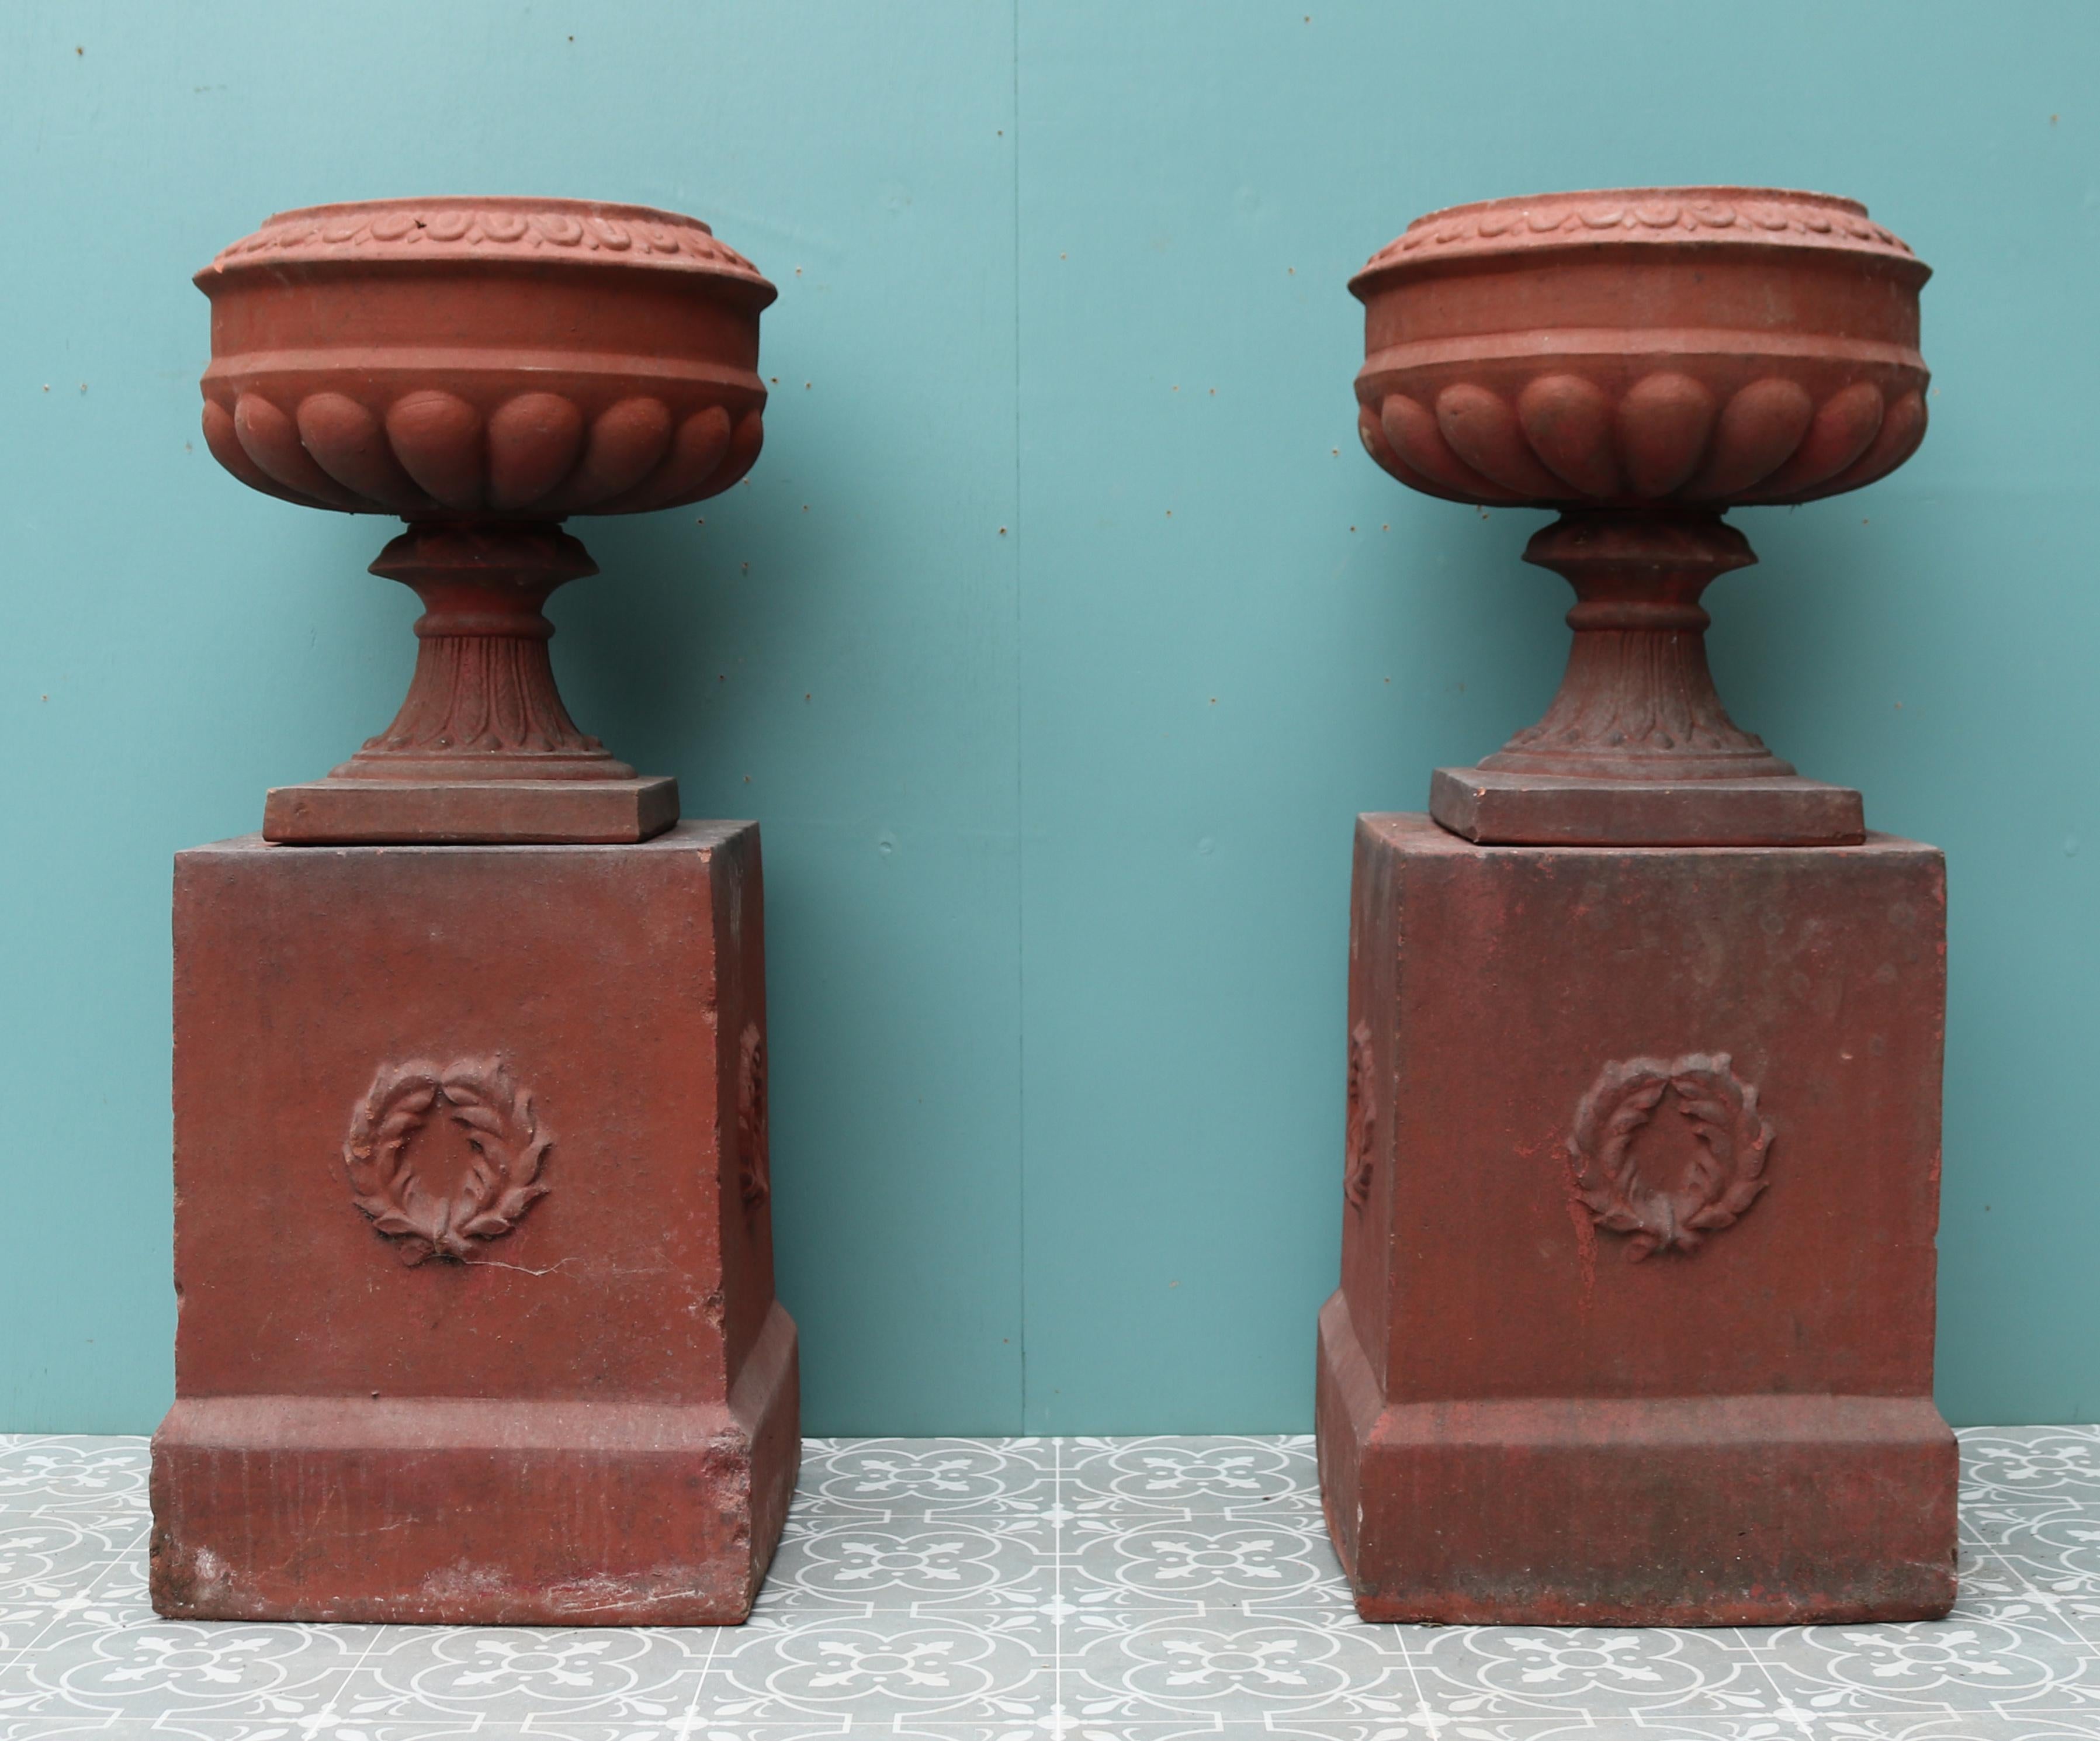 A pair of Victorian red terracotta urns with pedestals.

Additional Dimensions:

Base 35 x 35 cm